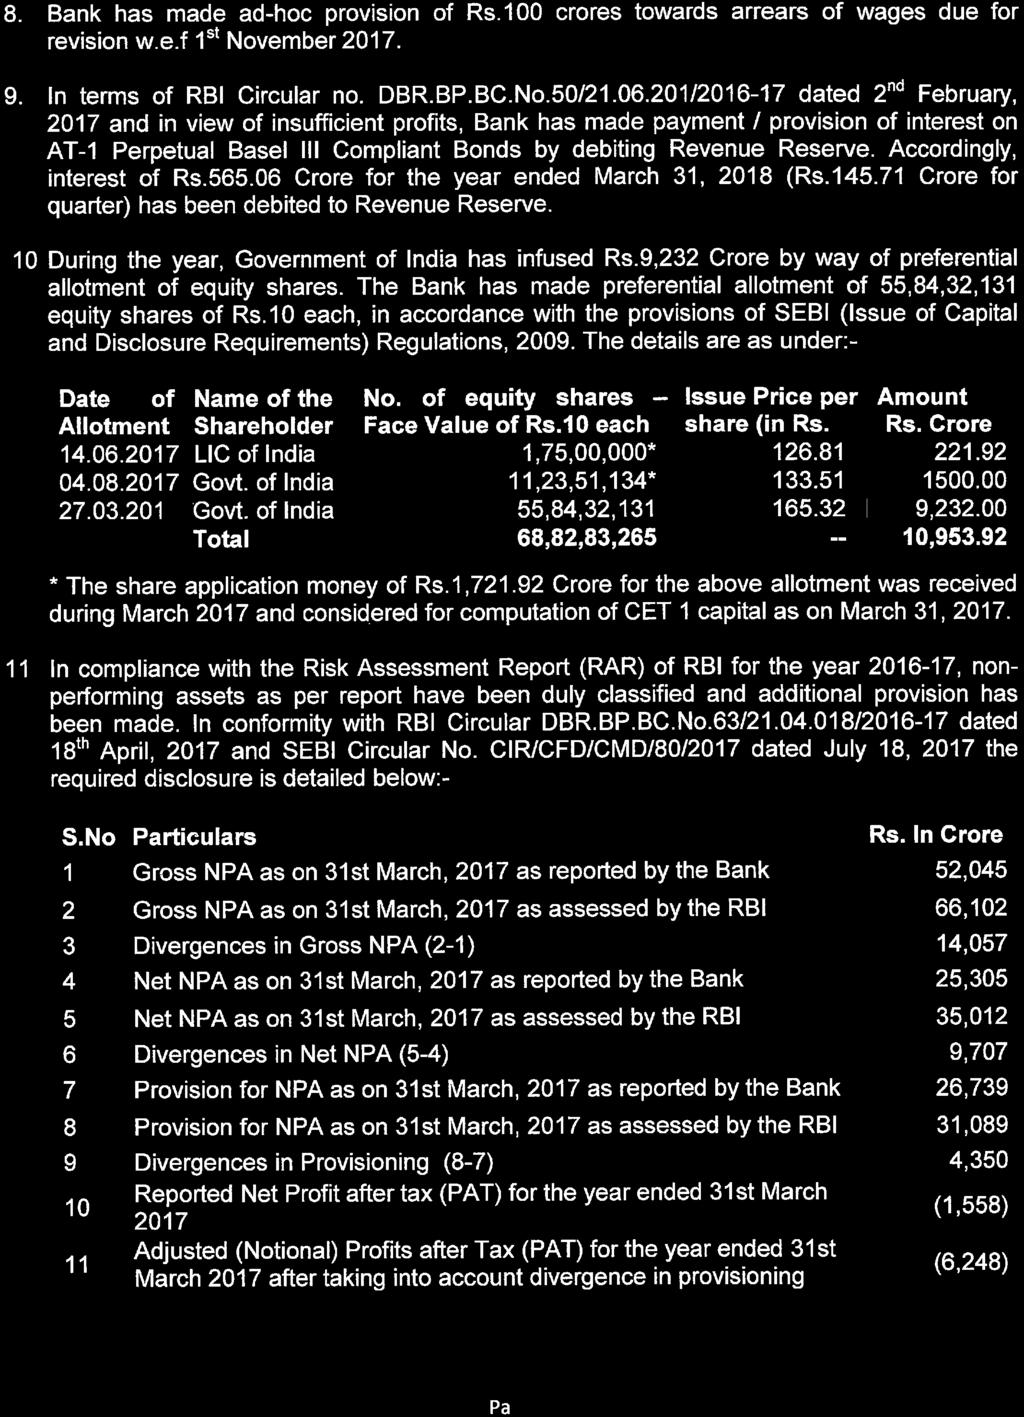 8. Bank has made ad-hoc provision of Rs.100 crores towards arrears of wages due for revision w.e.f 1st November 2017. 9. In terms of RBI Circular no. DBR.BP.BC.No.50/21.06.